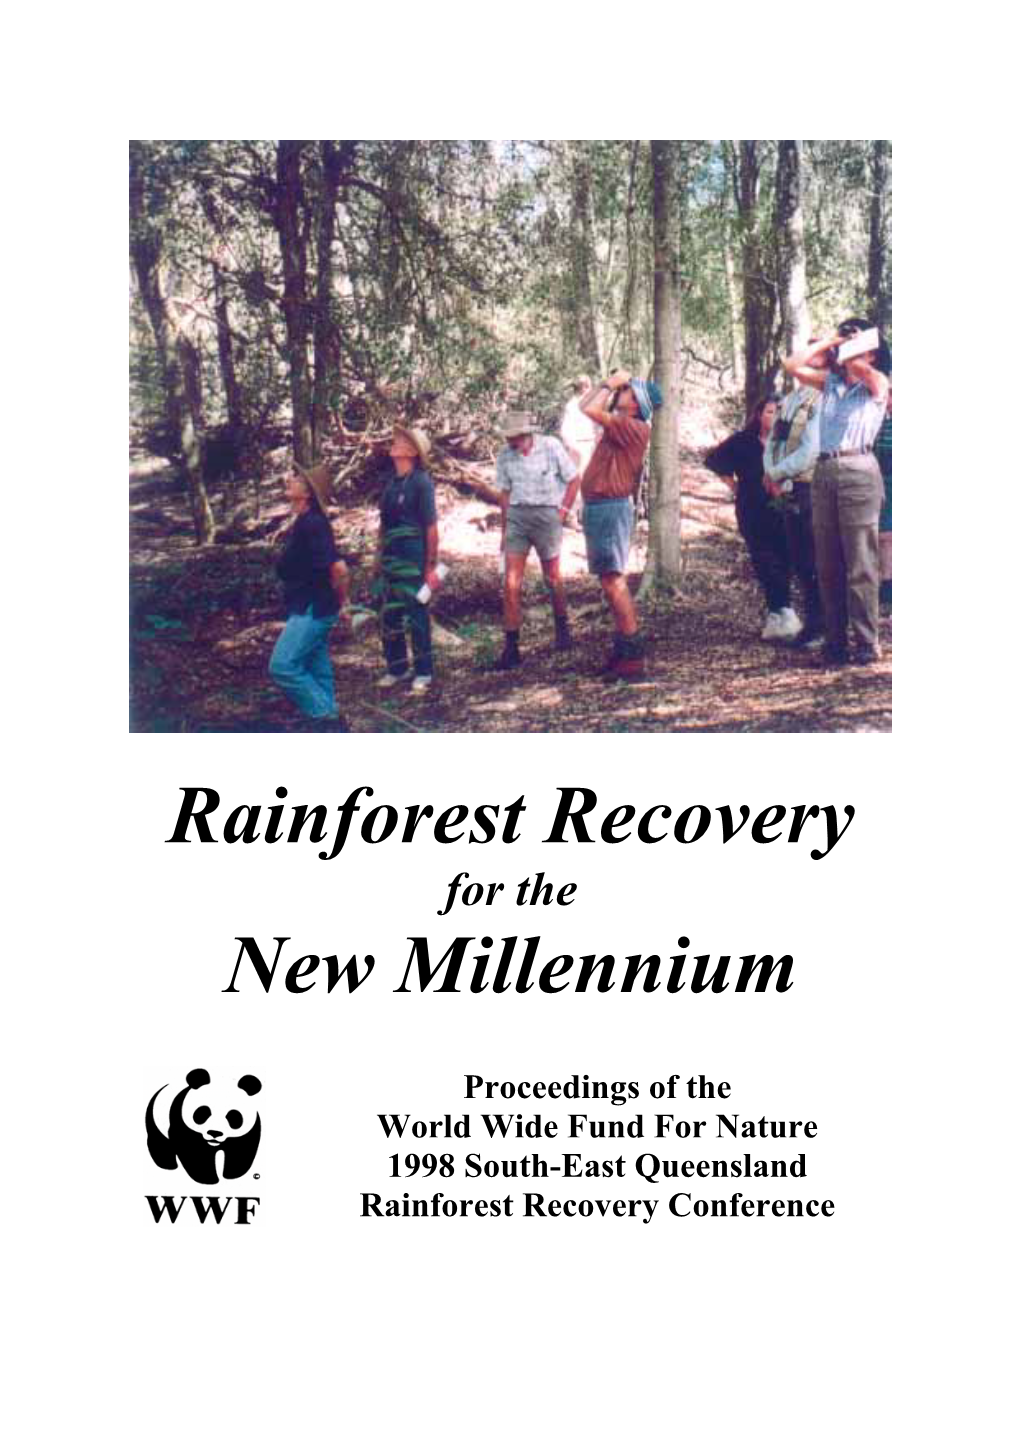 1998 WWF South East Queensland Rainforest Recovery Conference Proceedings